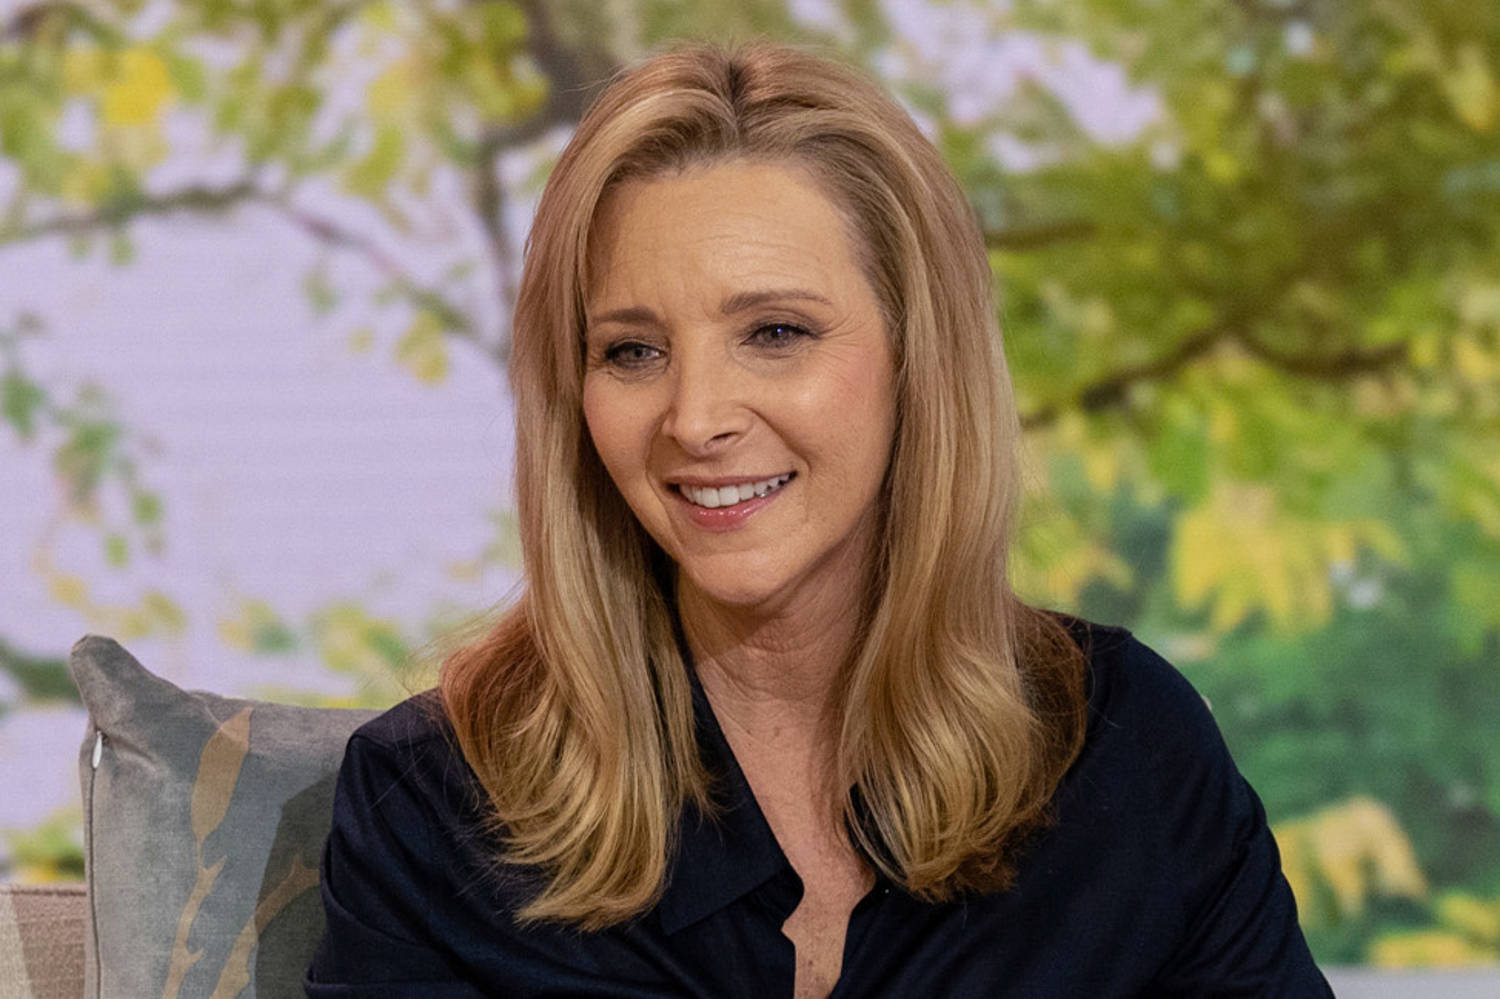 Lisa Kudrow clears air on hating studio audience laughter while taping 'Friends'